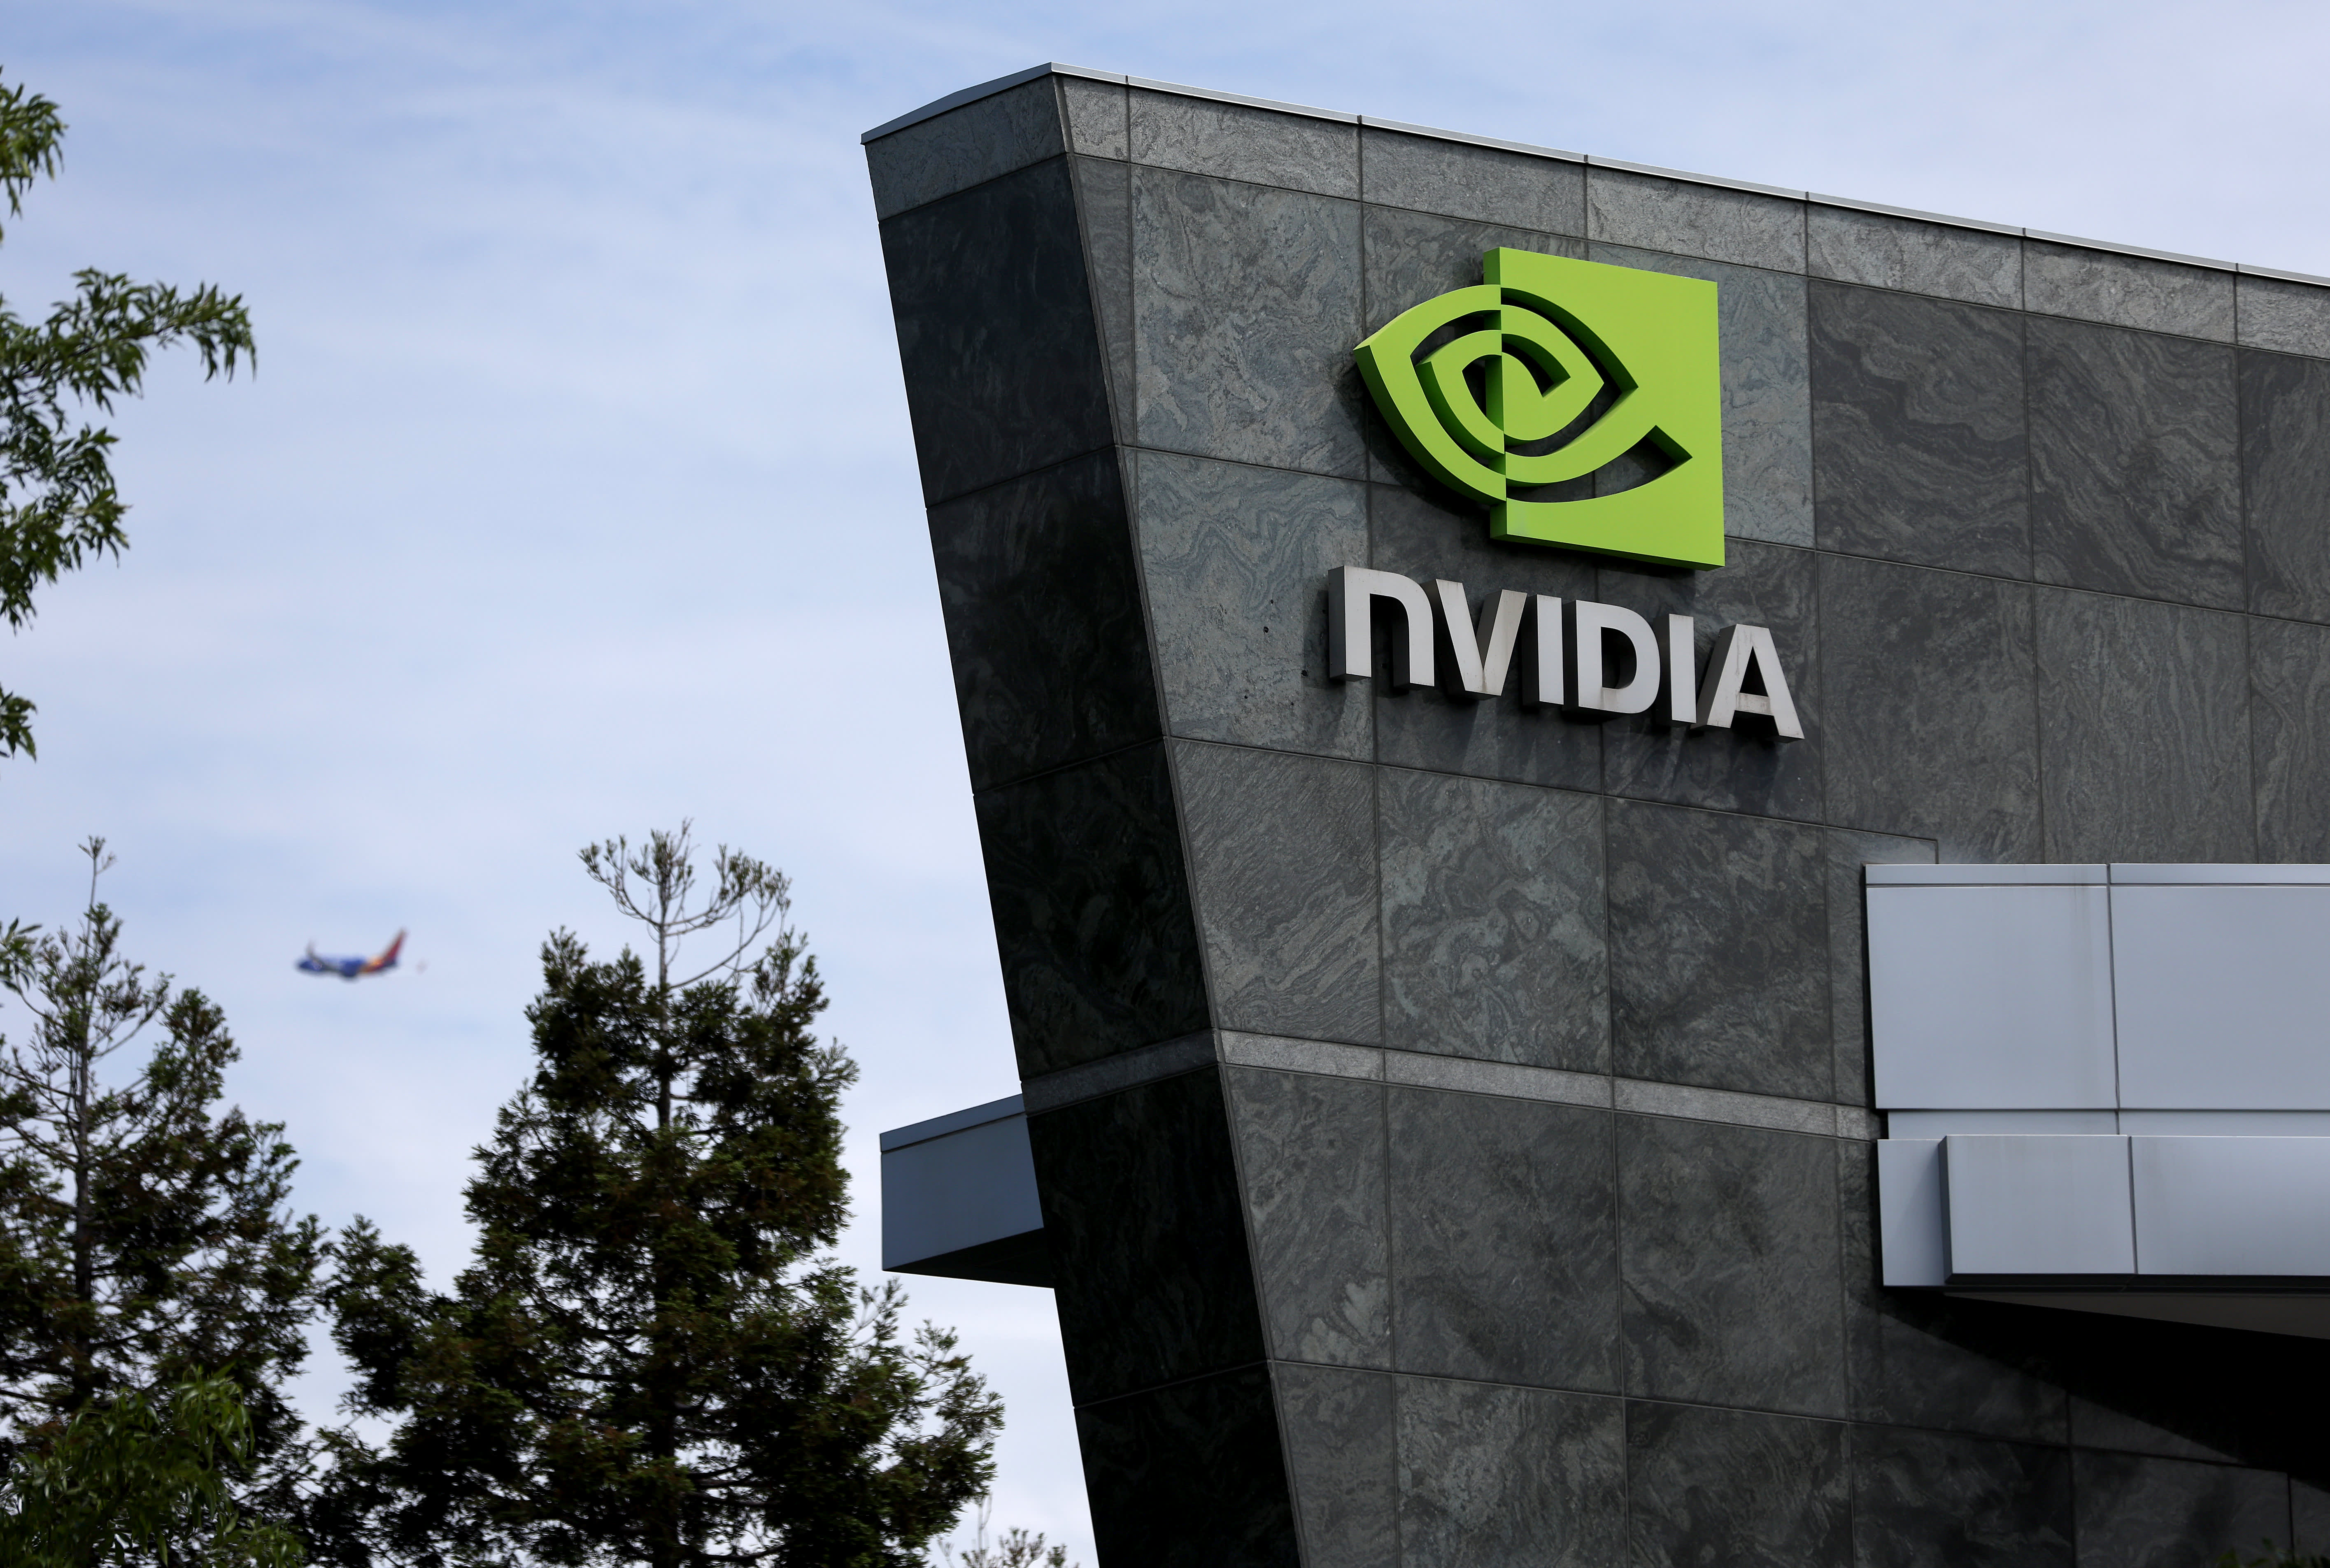 Forget Nvidia: Fund manager says buy these two chip giants instead, giving one 30% upside